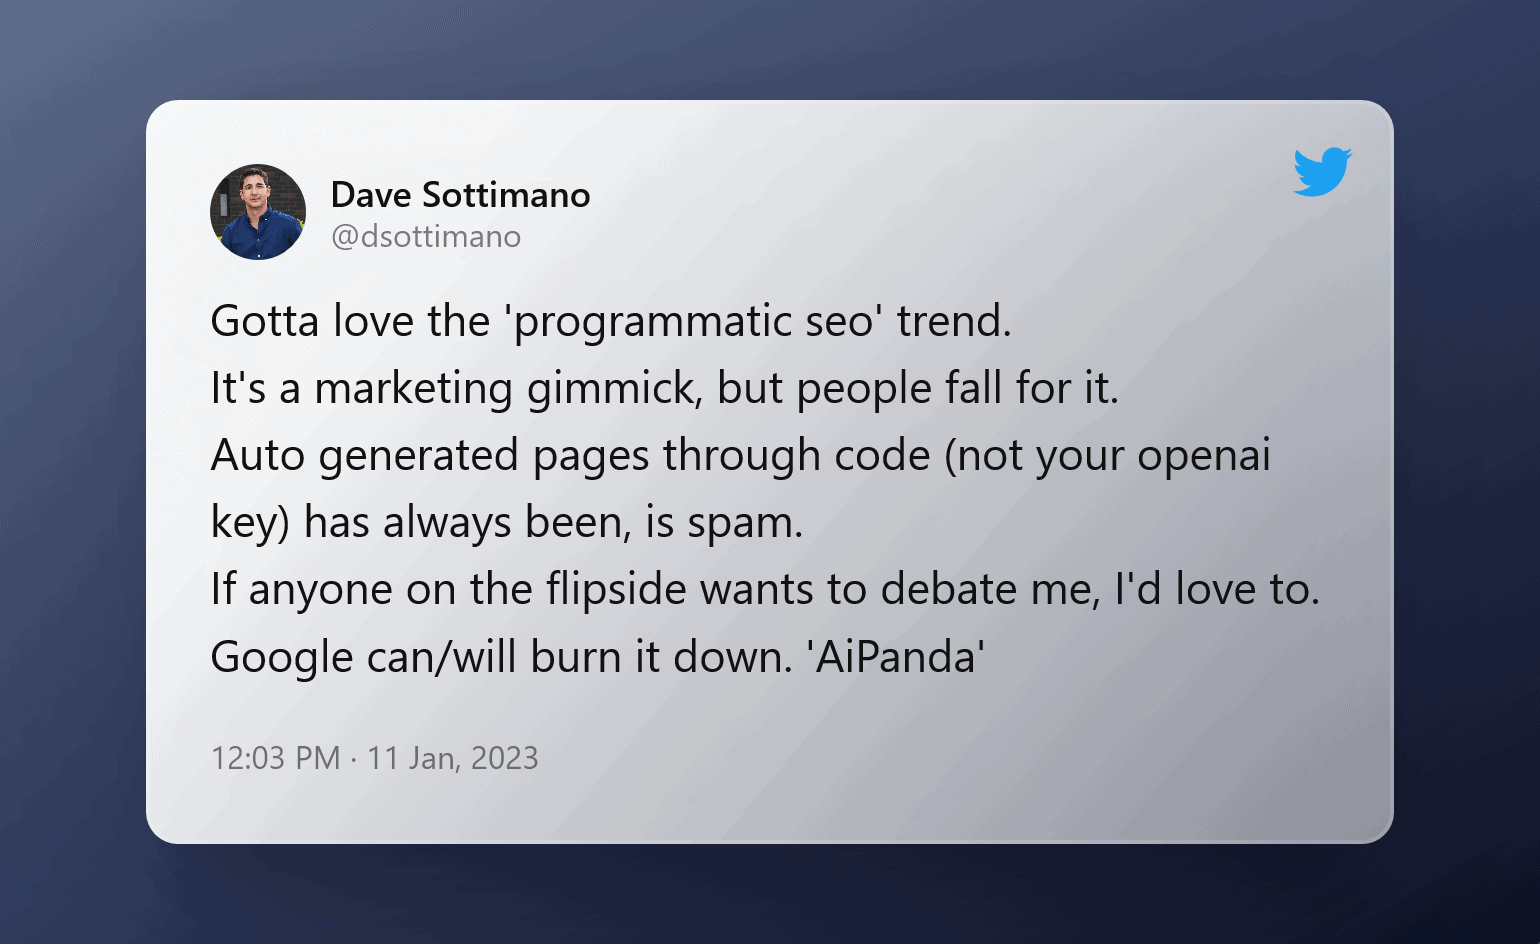 Tweet by Dave Sottimano